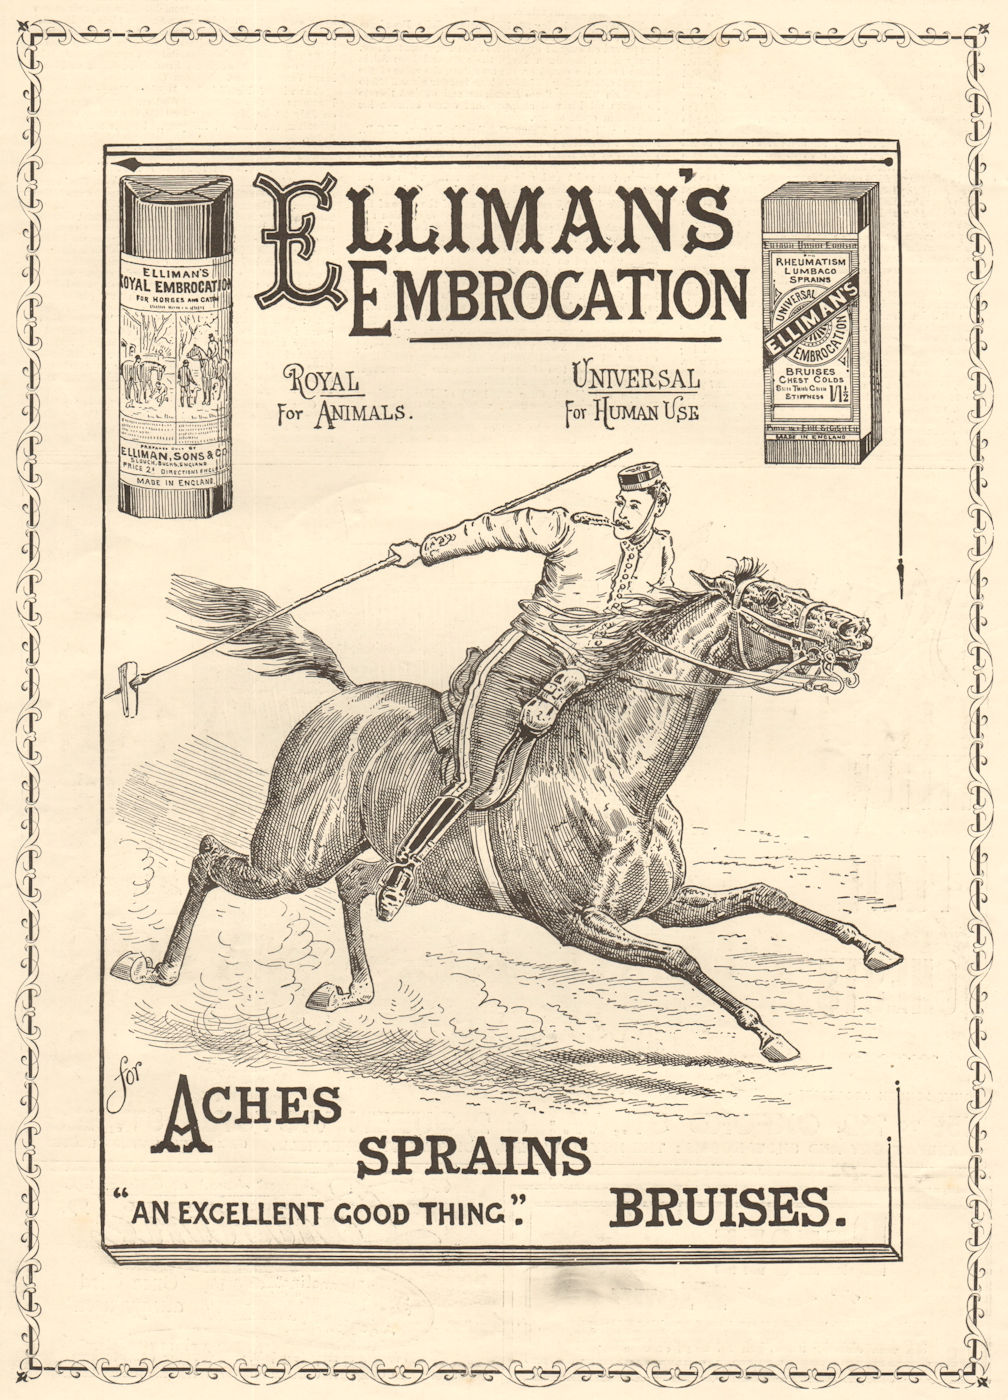 Associate Product Elliman's embrocation. "An excellent good thing". ADVERT. Lancer Horse 1896